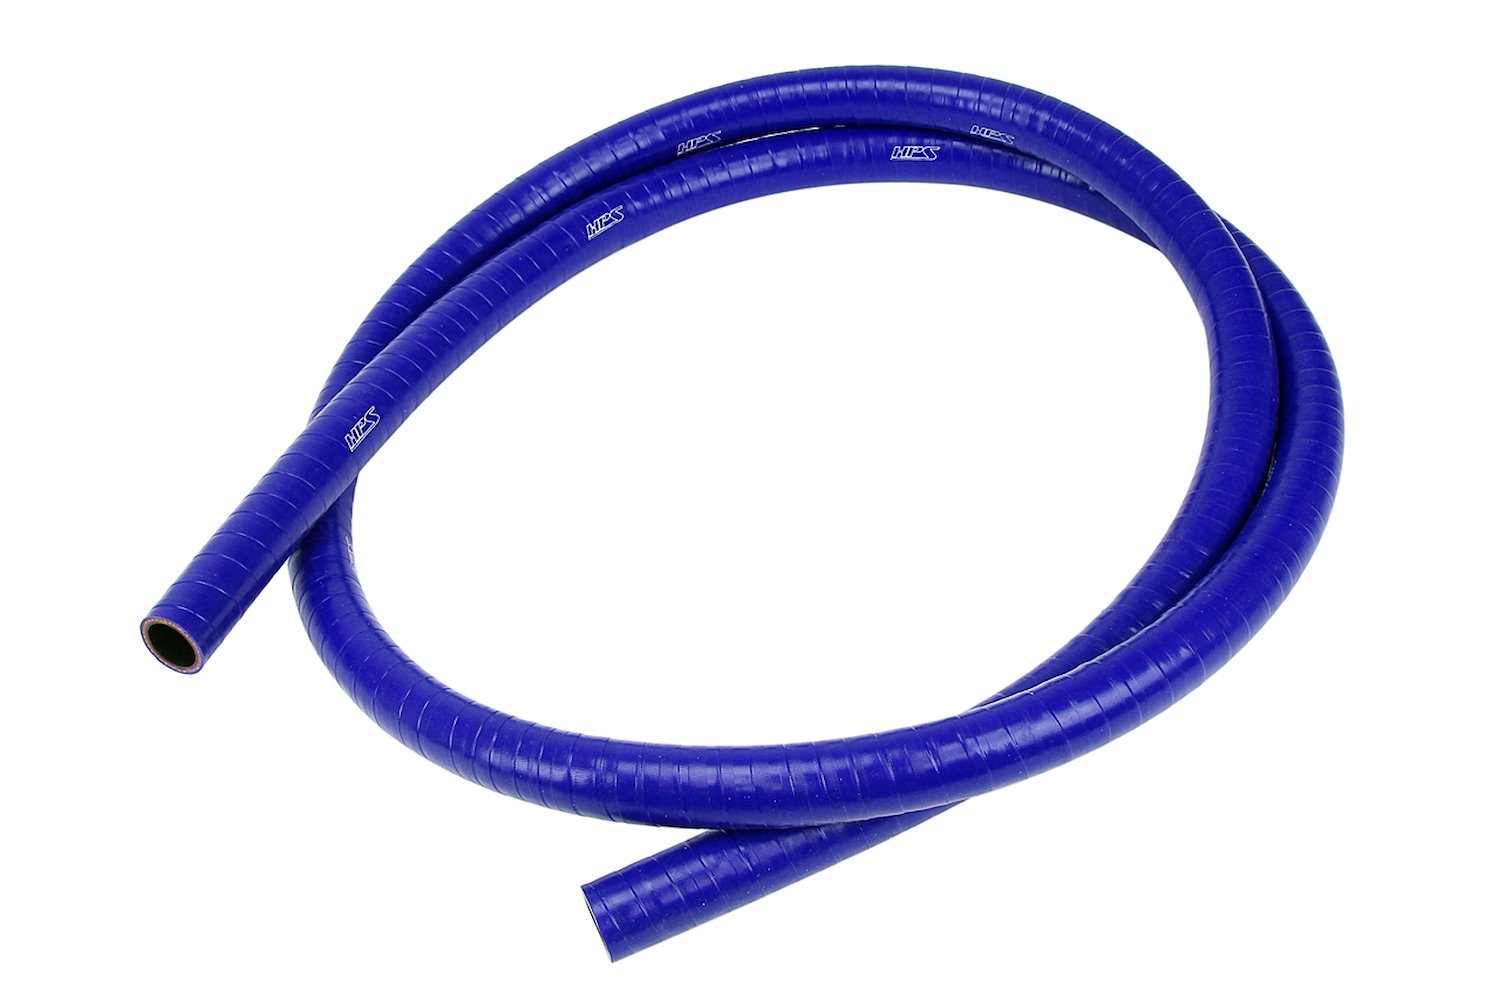 FKM-075-BLUE FKM Silicone Hose, Silicone FKM Lined Oil Resistant Hose, High-Temp 1-Ply Reinforced, 3/4 in. ID, Blue